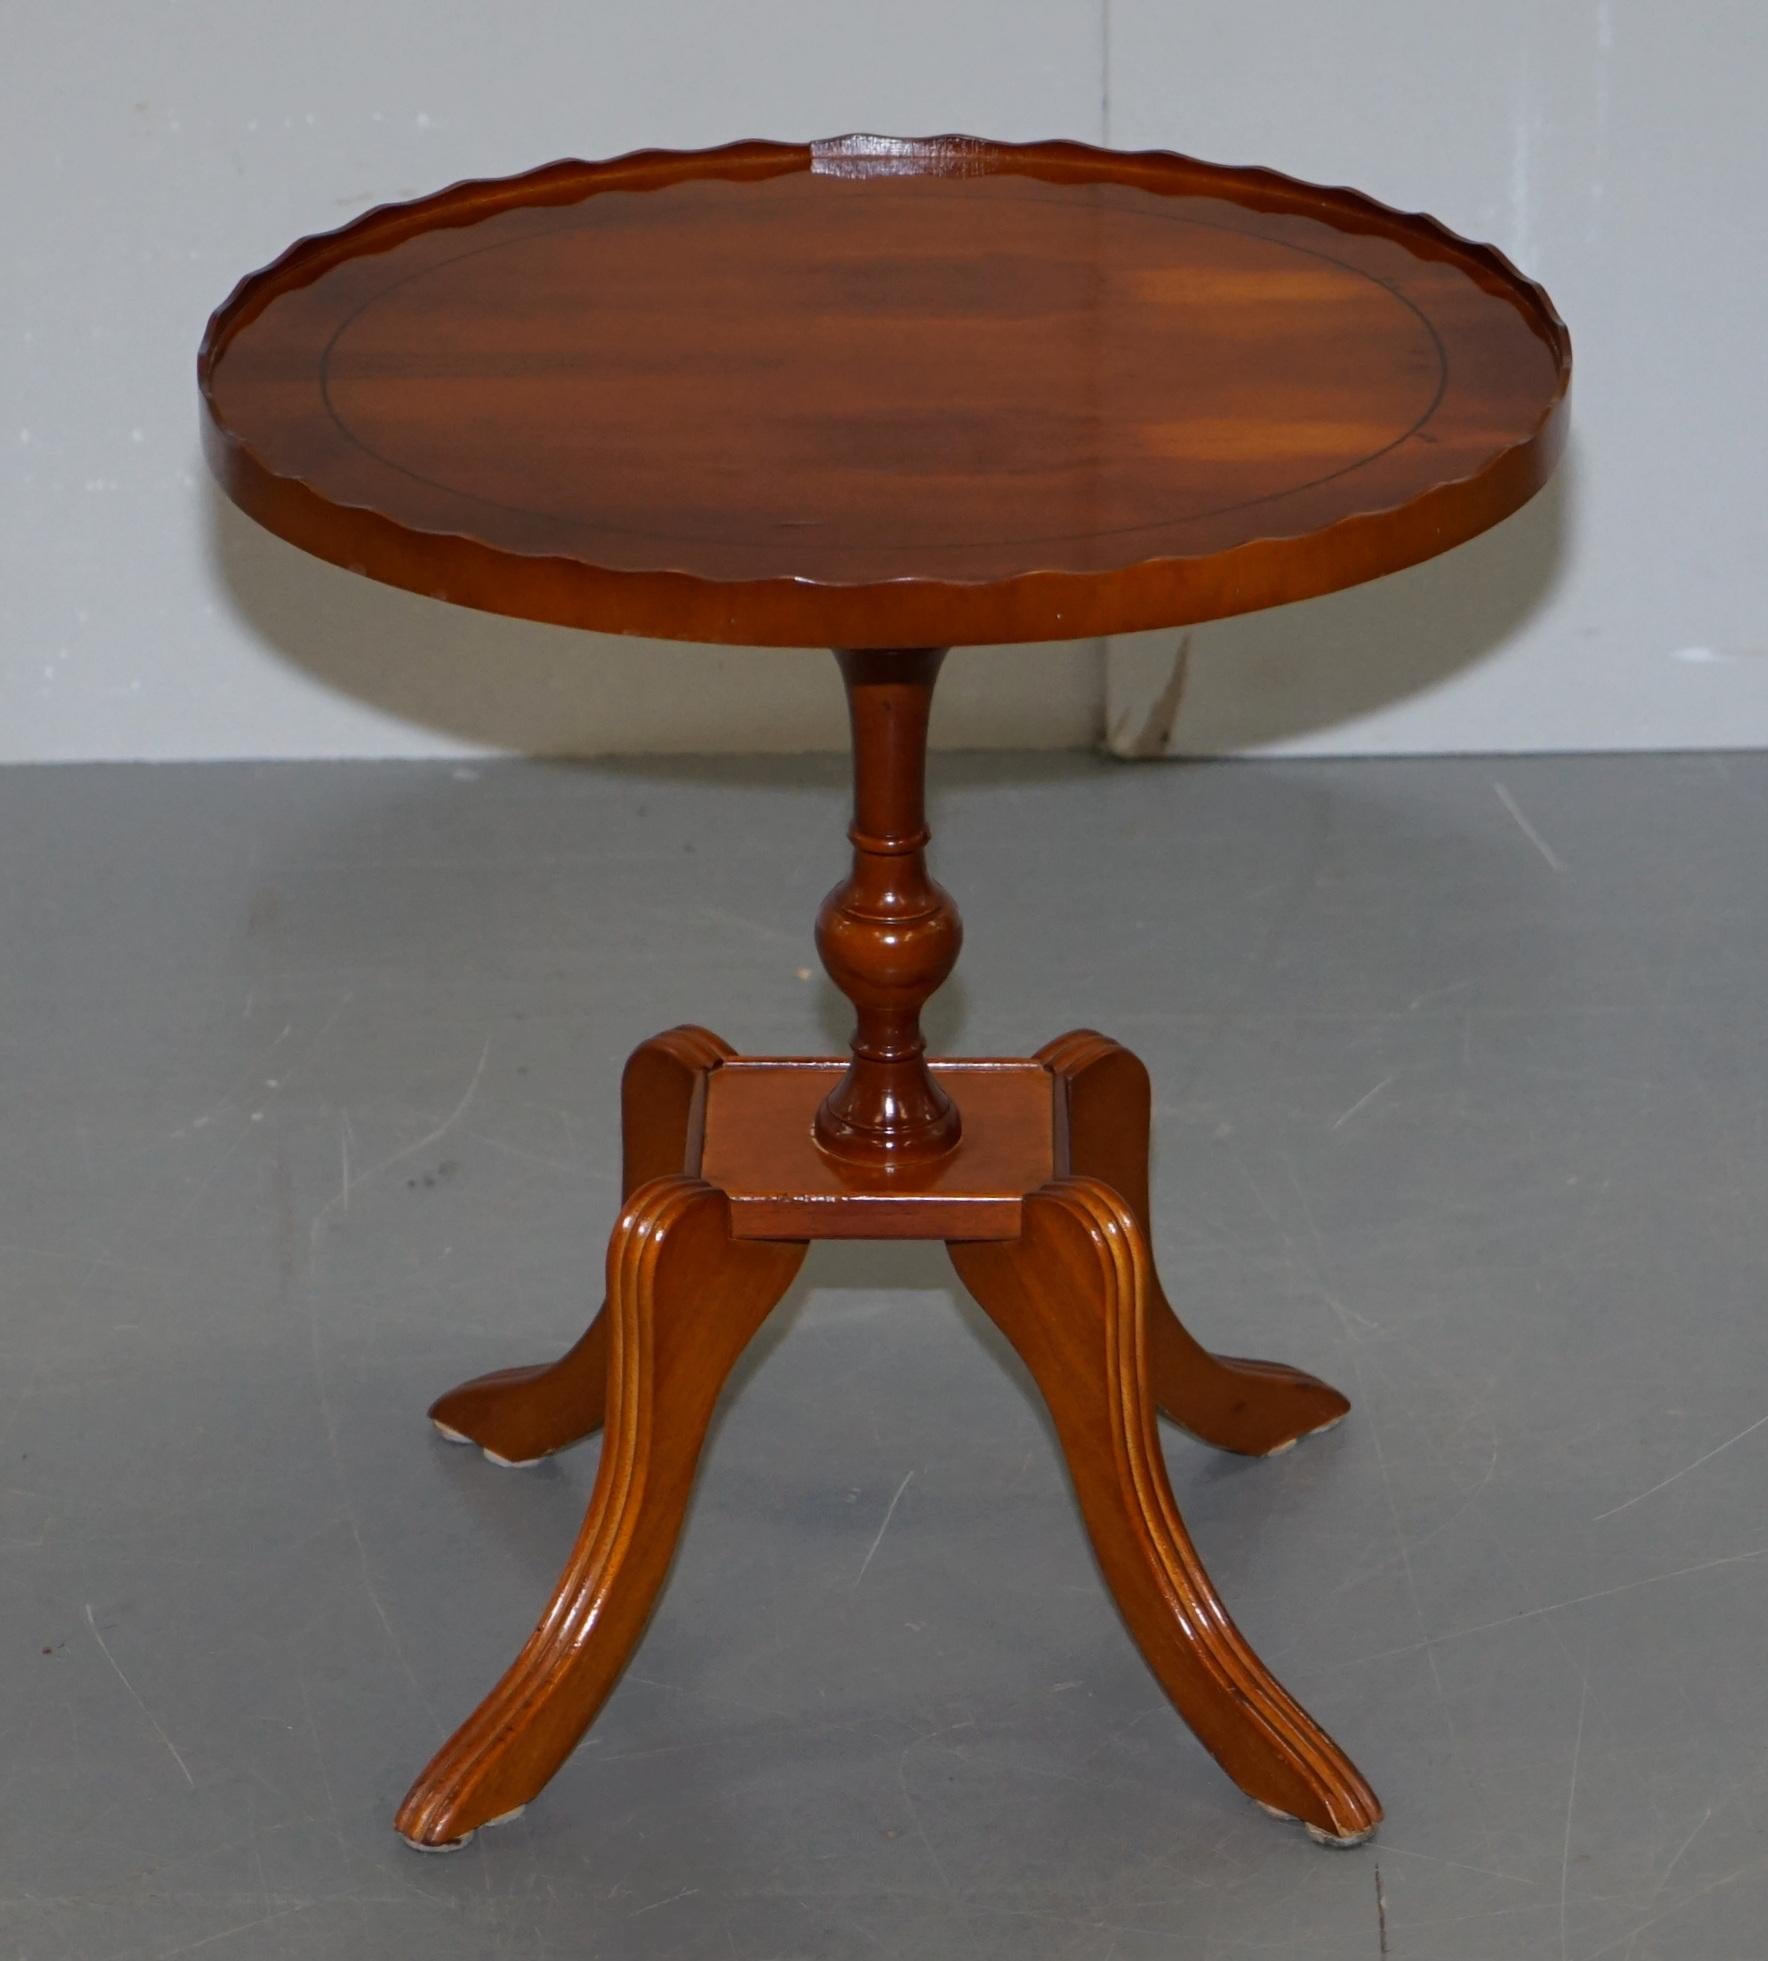 We are delighted to offer for sale this lovely hand made in England vintage Beresford & Hicks Burr Yew wood side table

This piece is in sublime condition, the timber patina is exquisite, it has an oval top with a timber gallery rail like a silver